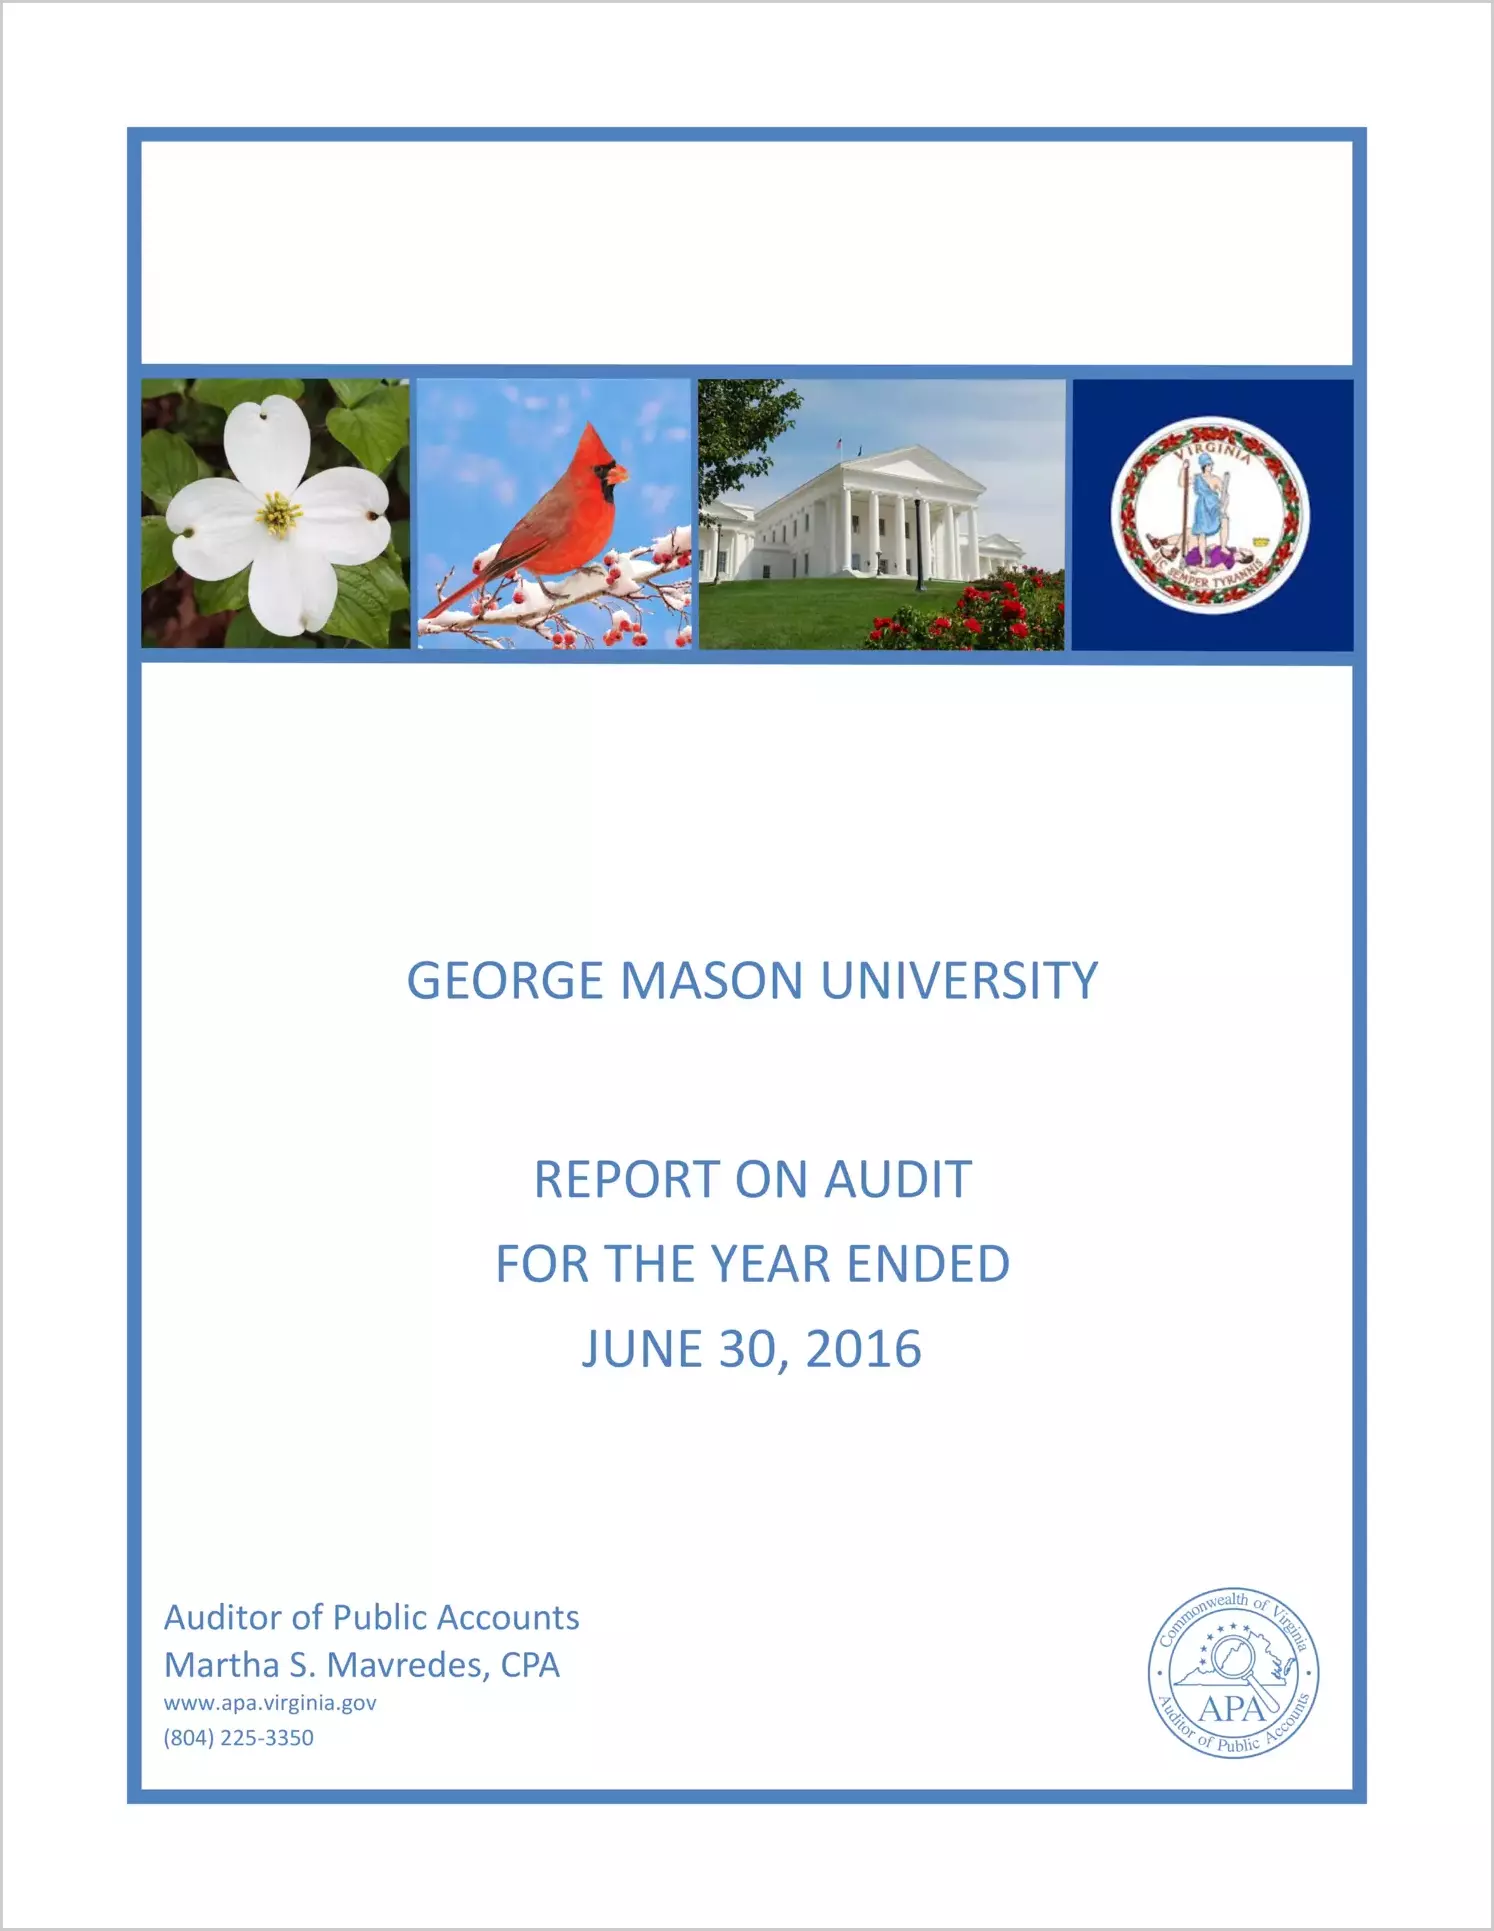 George Mason University for the year ended June 30, 2016